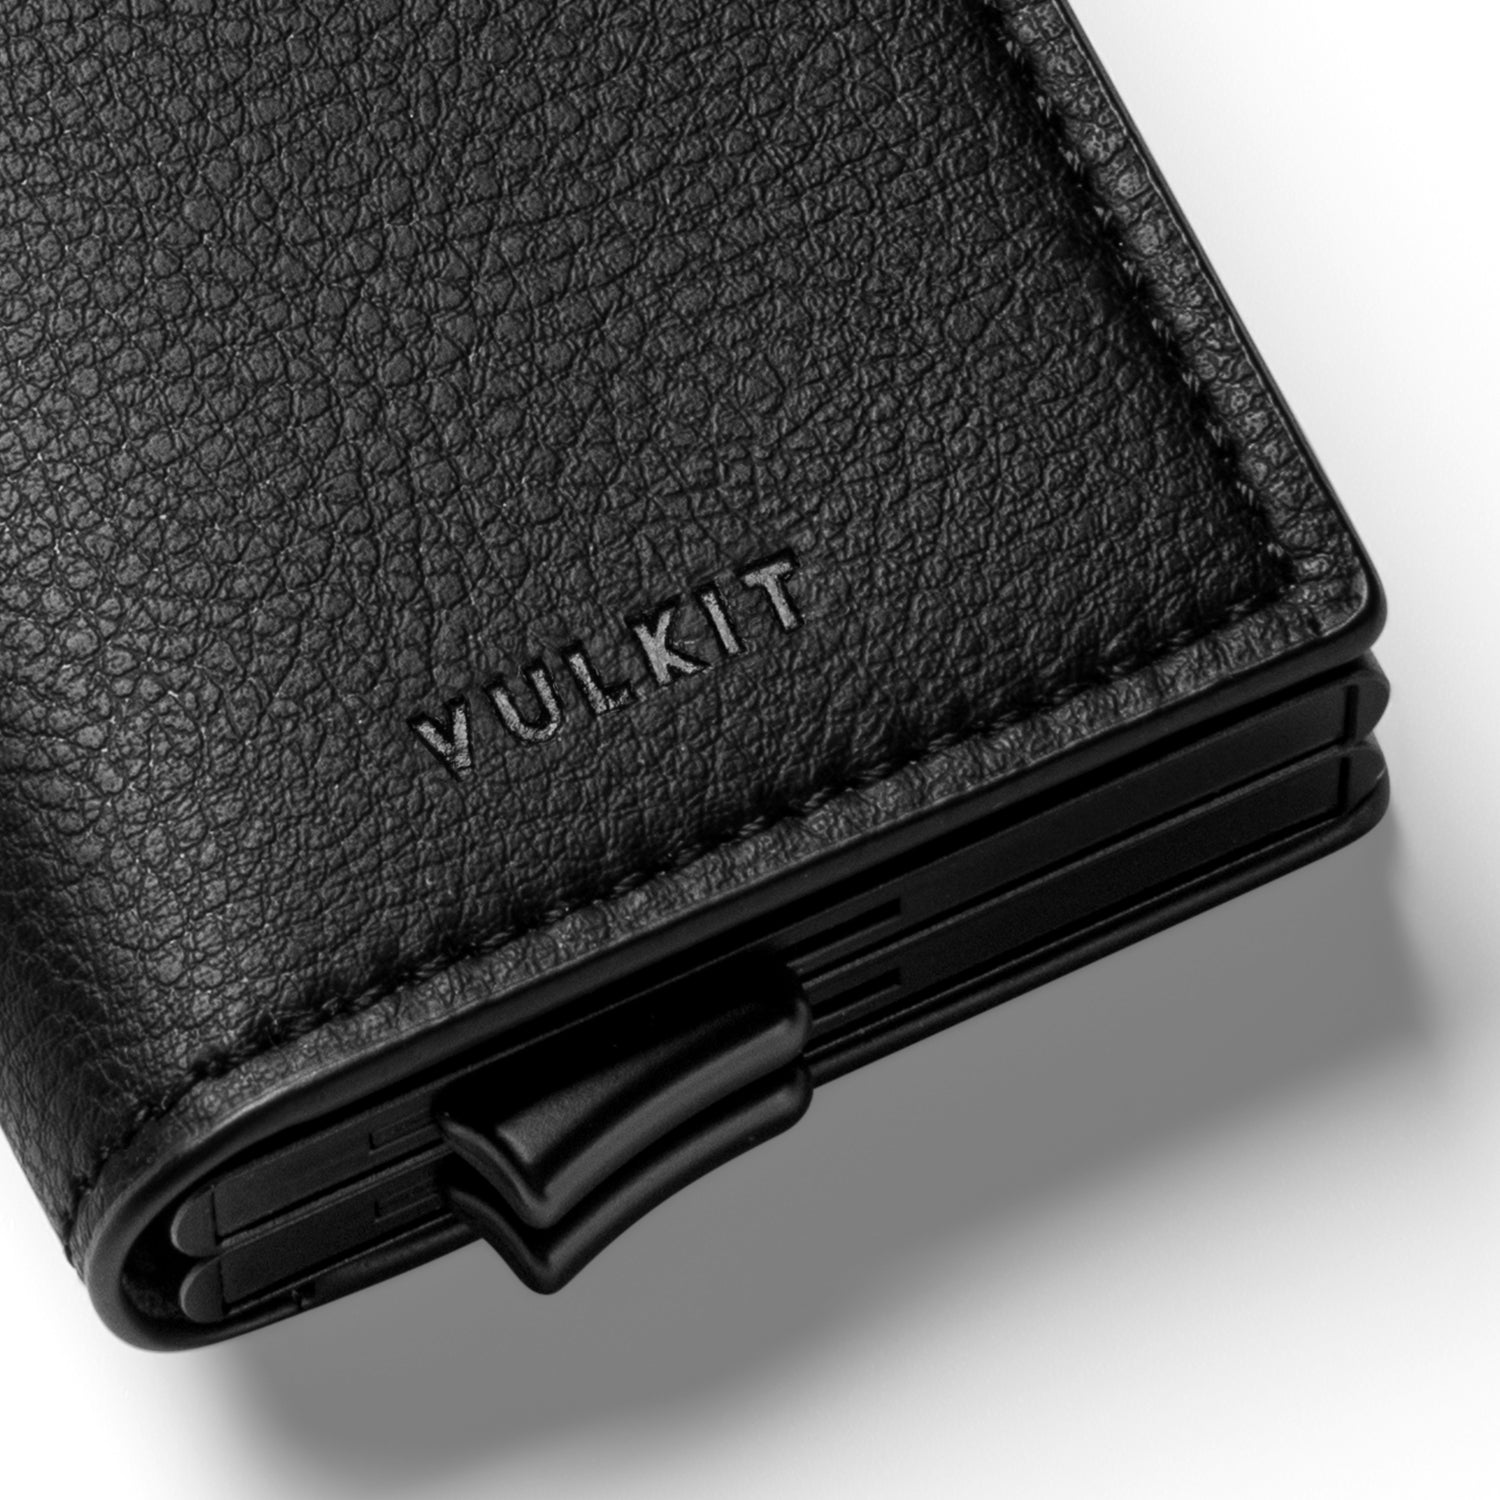 VC201d- Double Aluminum Card Holders For more Storage